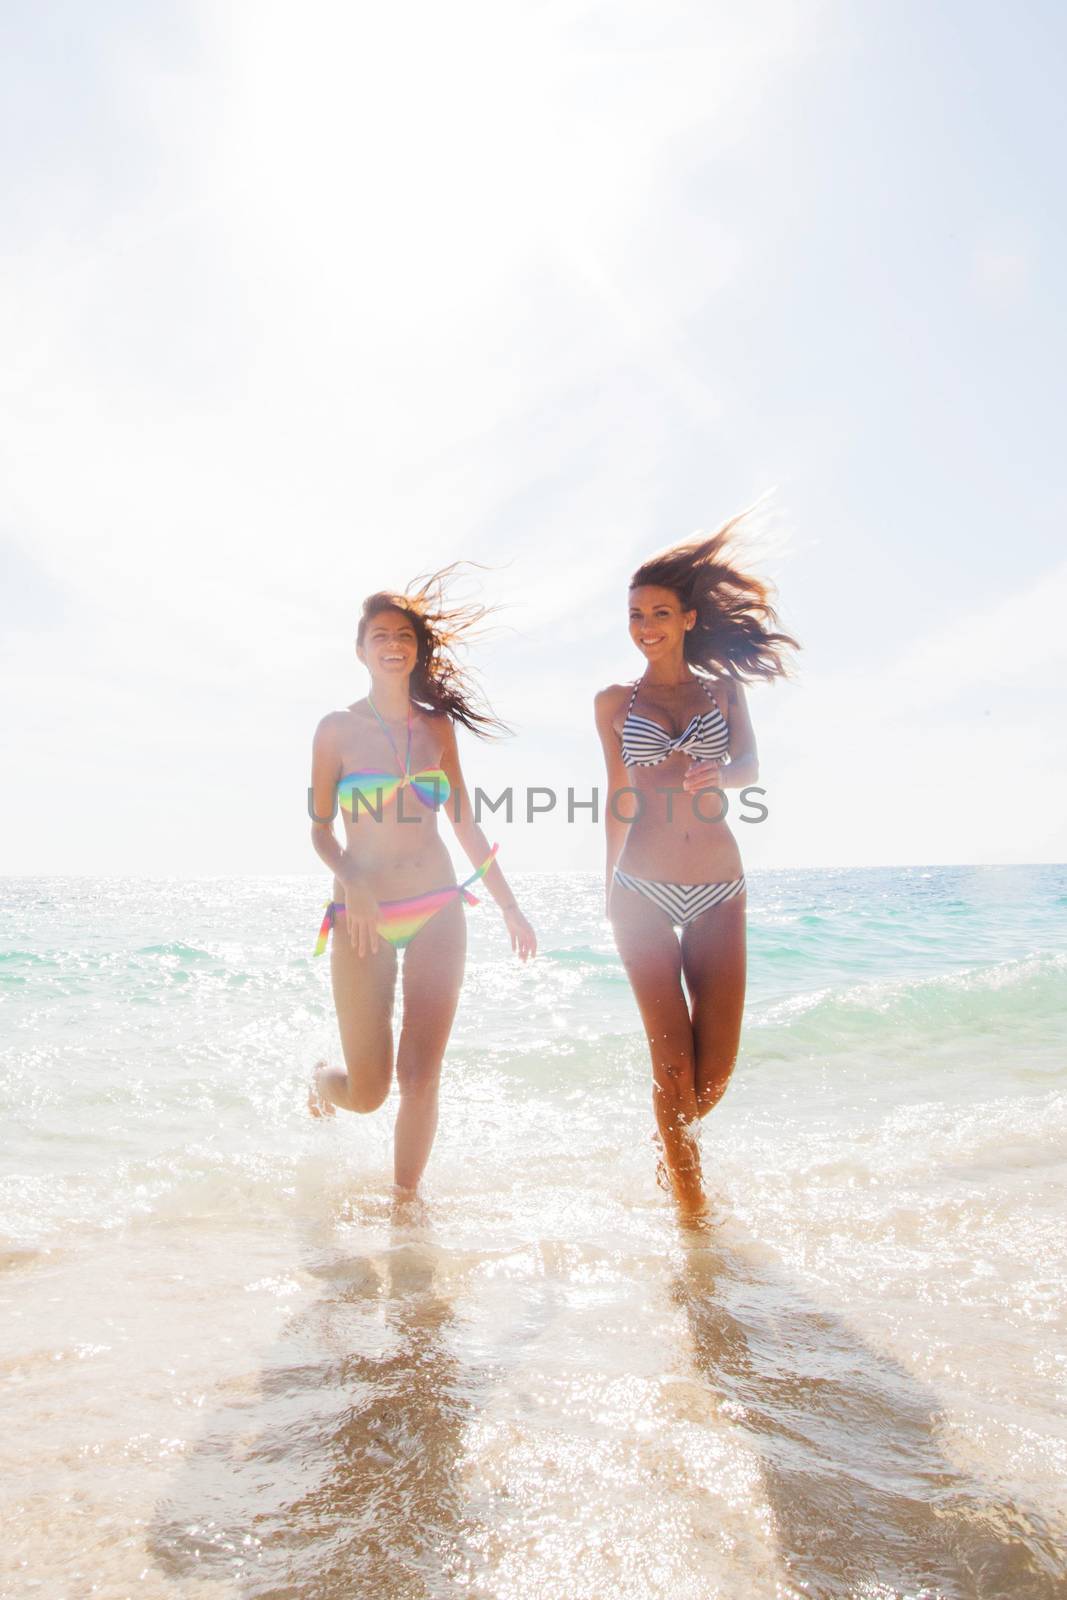 Two young and attractive women in bikini running by the beach